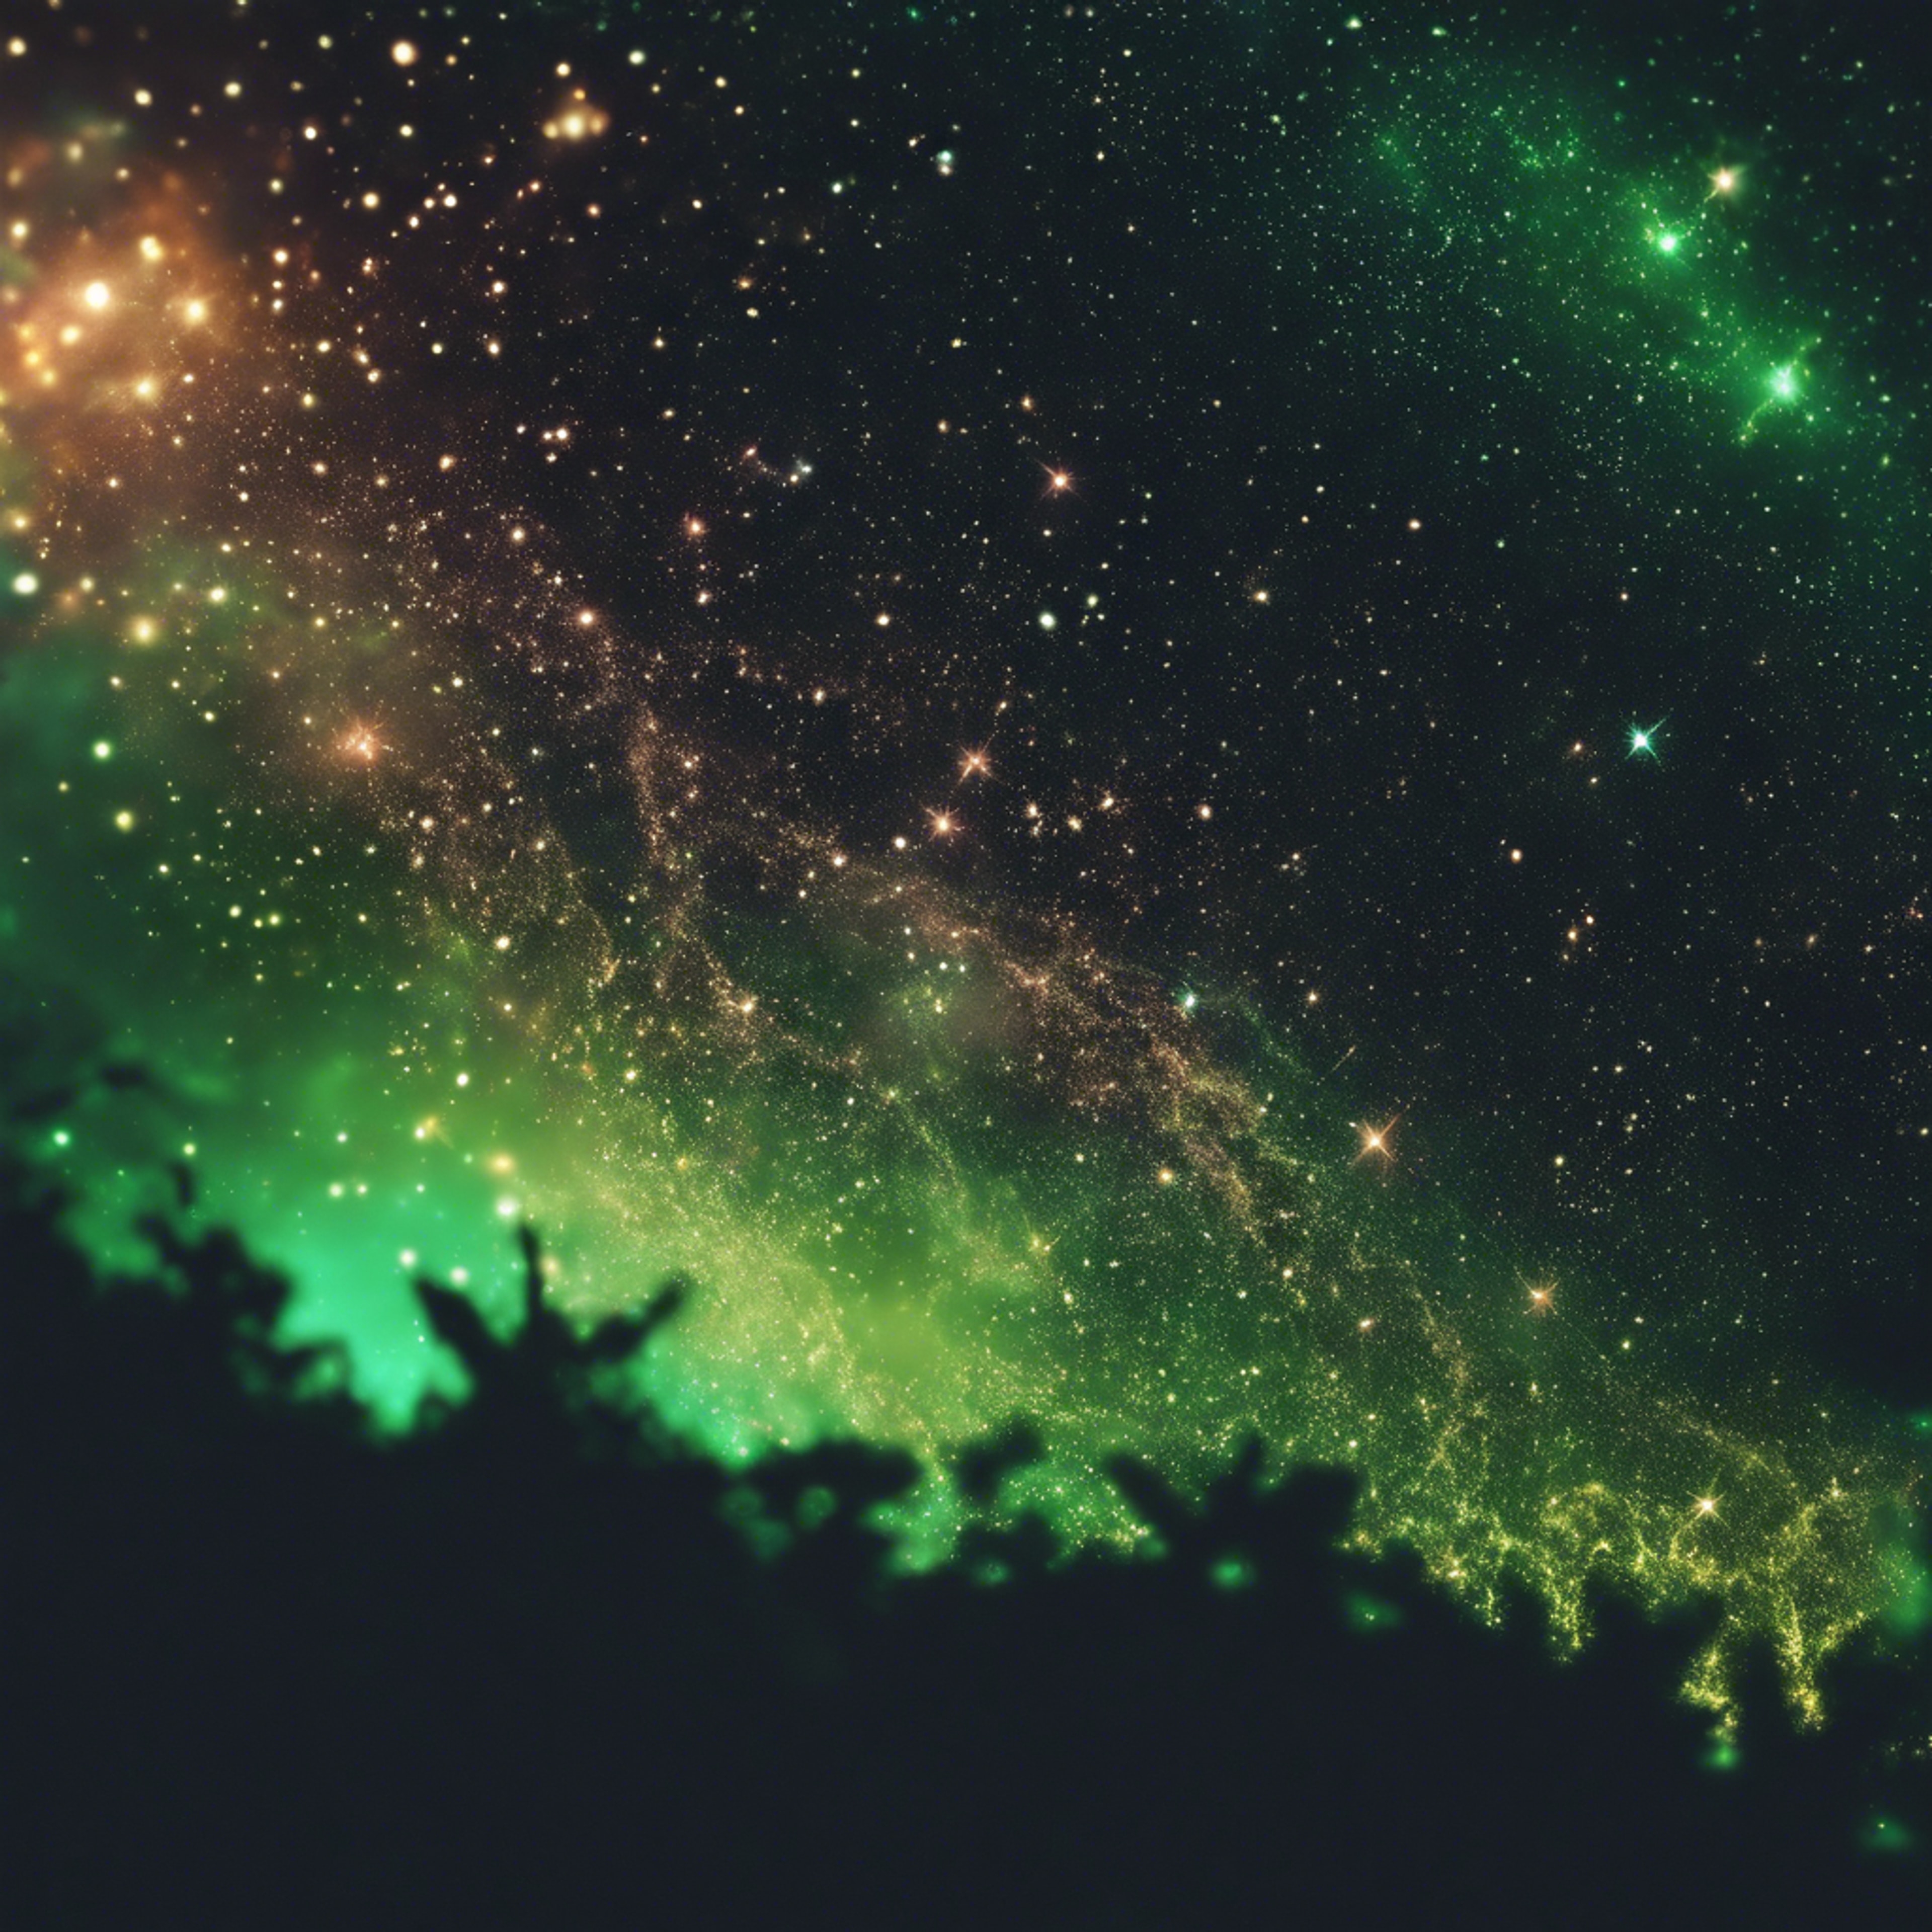 A galaxy seen from the edge of the universe, with cool neon green stars sparking in the darkness. Tapeta[23da465cd95e430a971e]